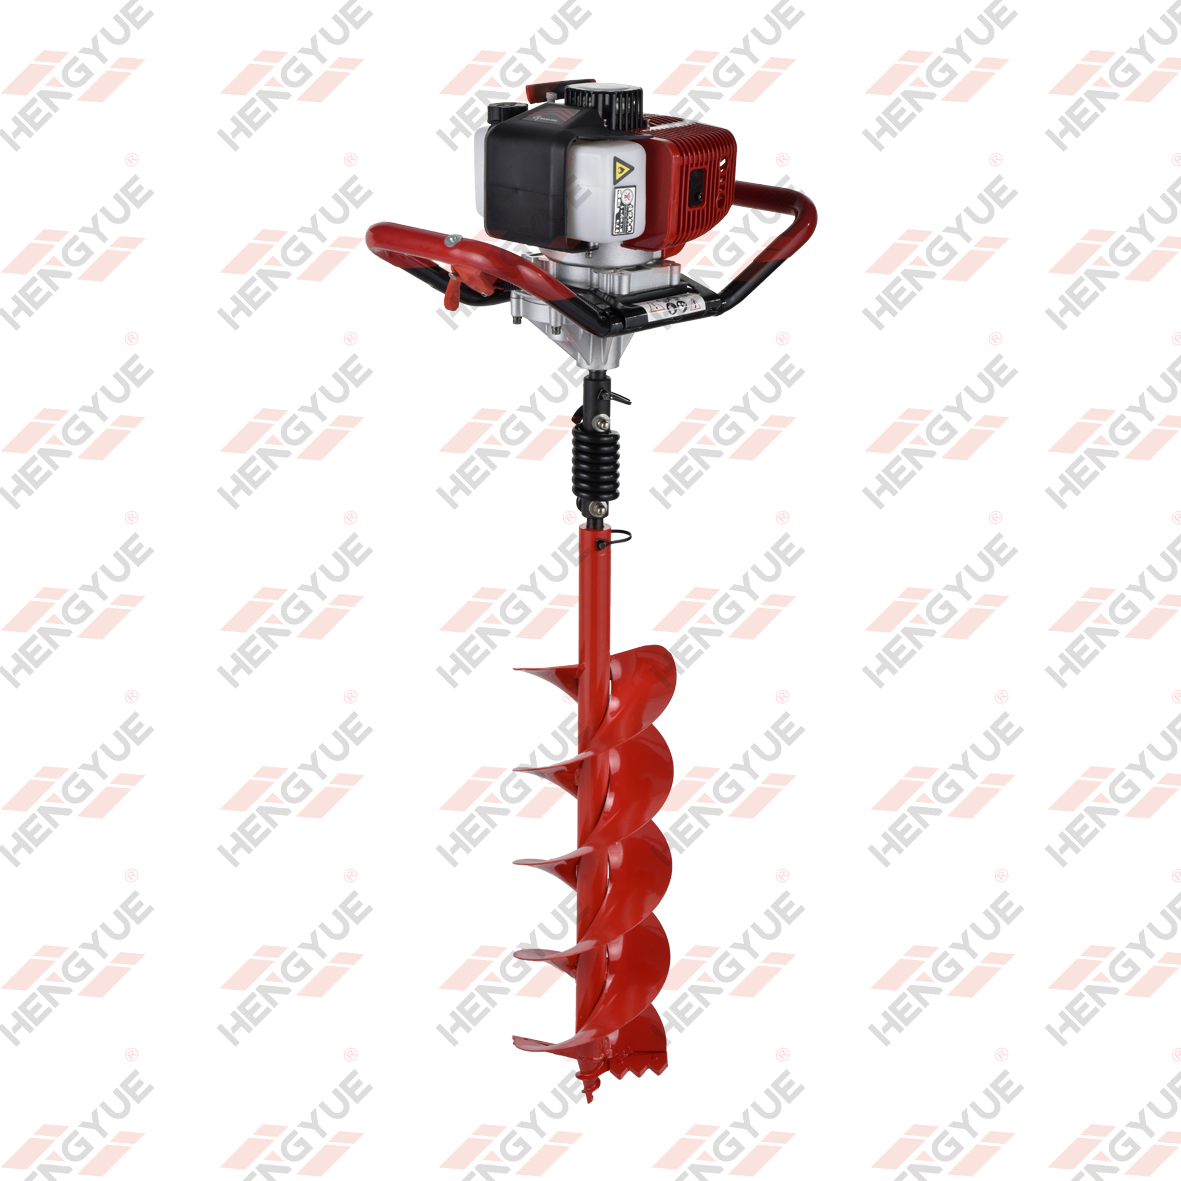 58CC Hand Held Earth Auger Earth Auger Drilling Machine